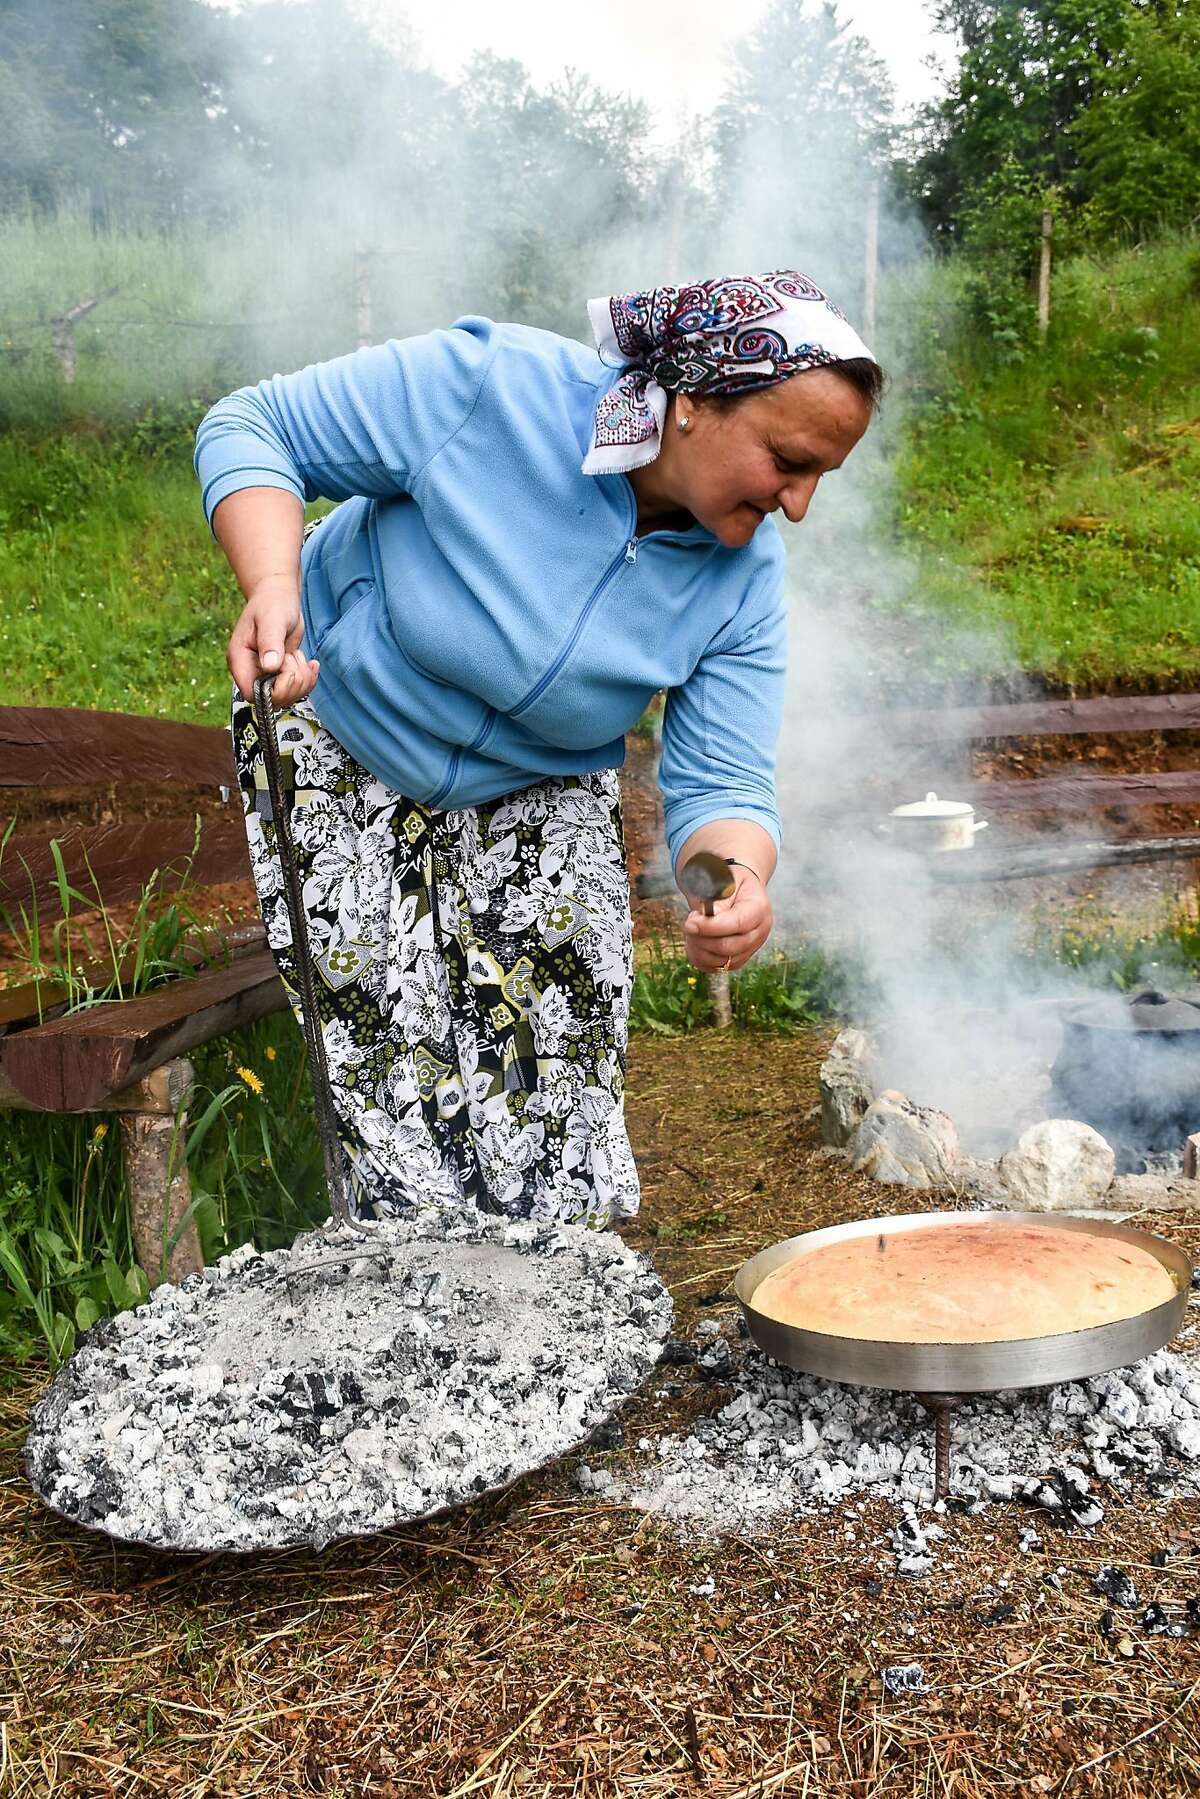 Halida Kurtishi bakes traditional Bosnian bread over coals in an outdoor pit for lunch.